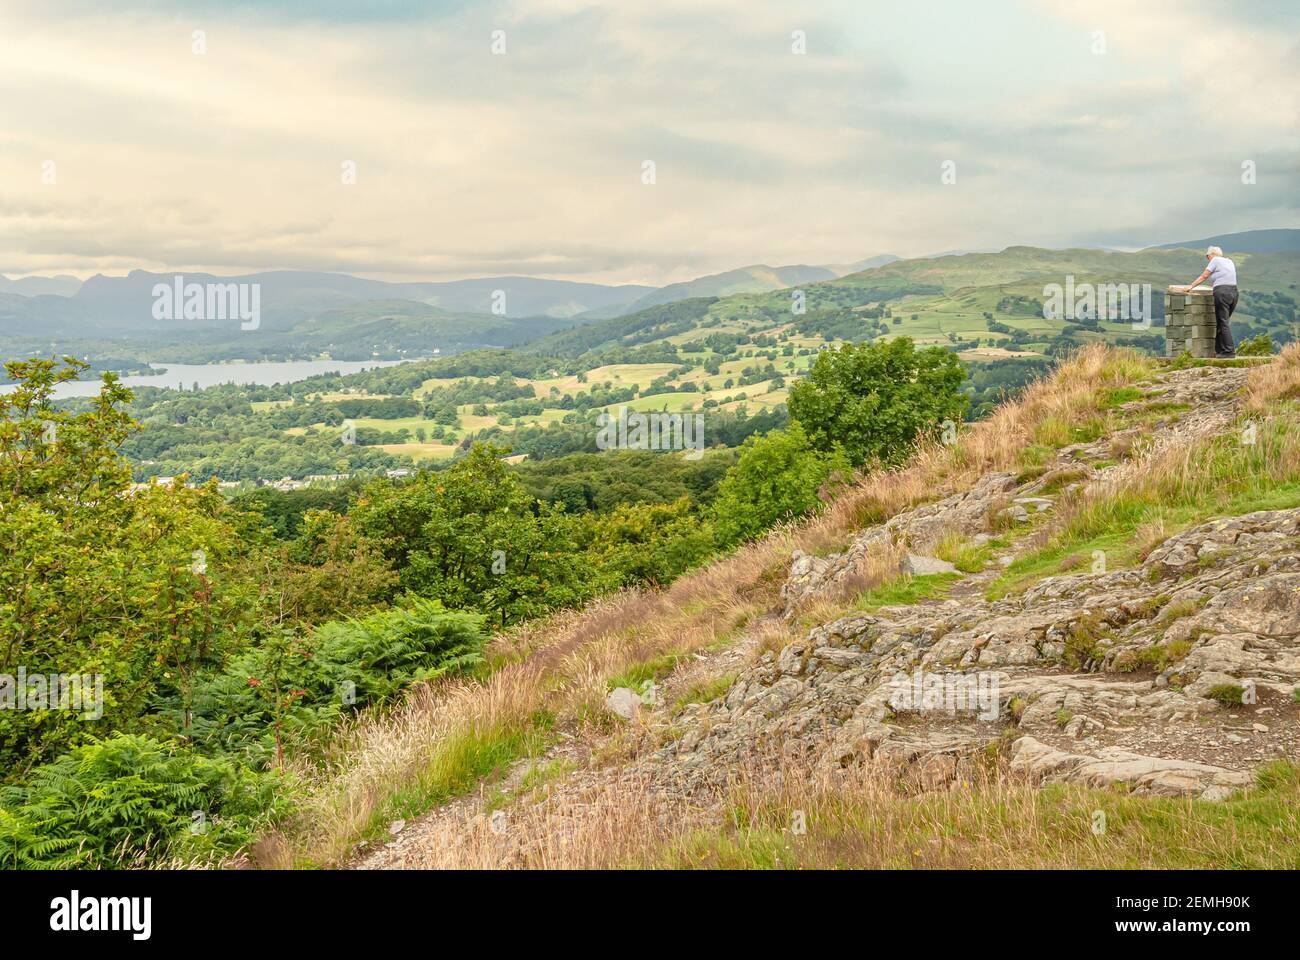 Woman at the Orrest Head Viewpoint near Windermere, Lake District, Cumbria, England, UK Stock Photo